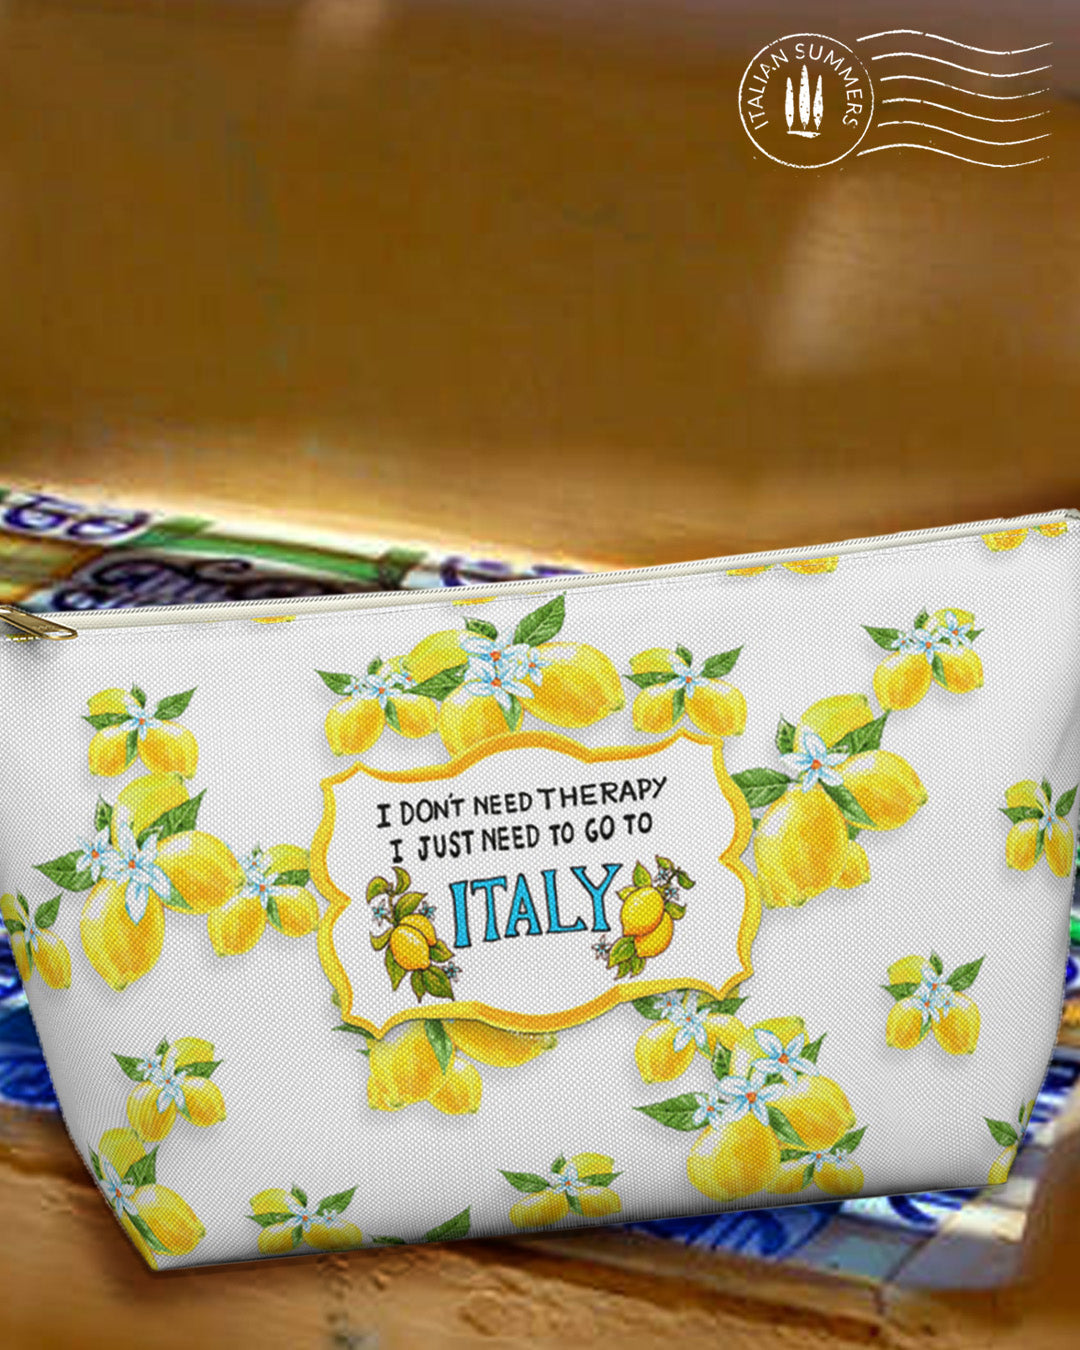 Clutch THERAPY-LEMON Pattern! This one-of-a-kind Italian-inspired clutch features a fun, sun-drenched lemon pattern that stands out, plus the delightful quote "I don't need therapy, I just need to go to Italy" by Italian Summers. 